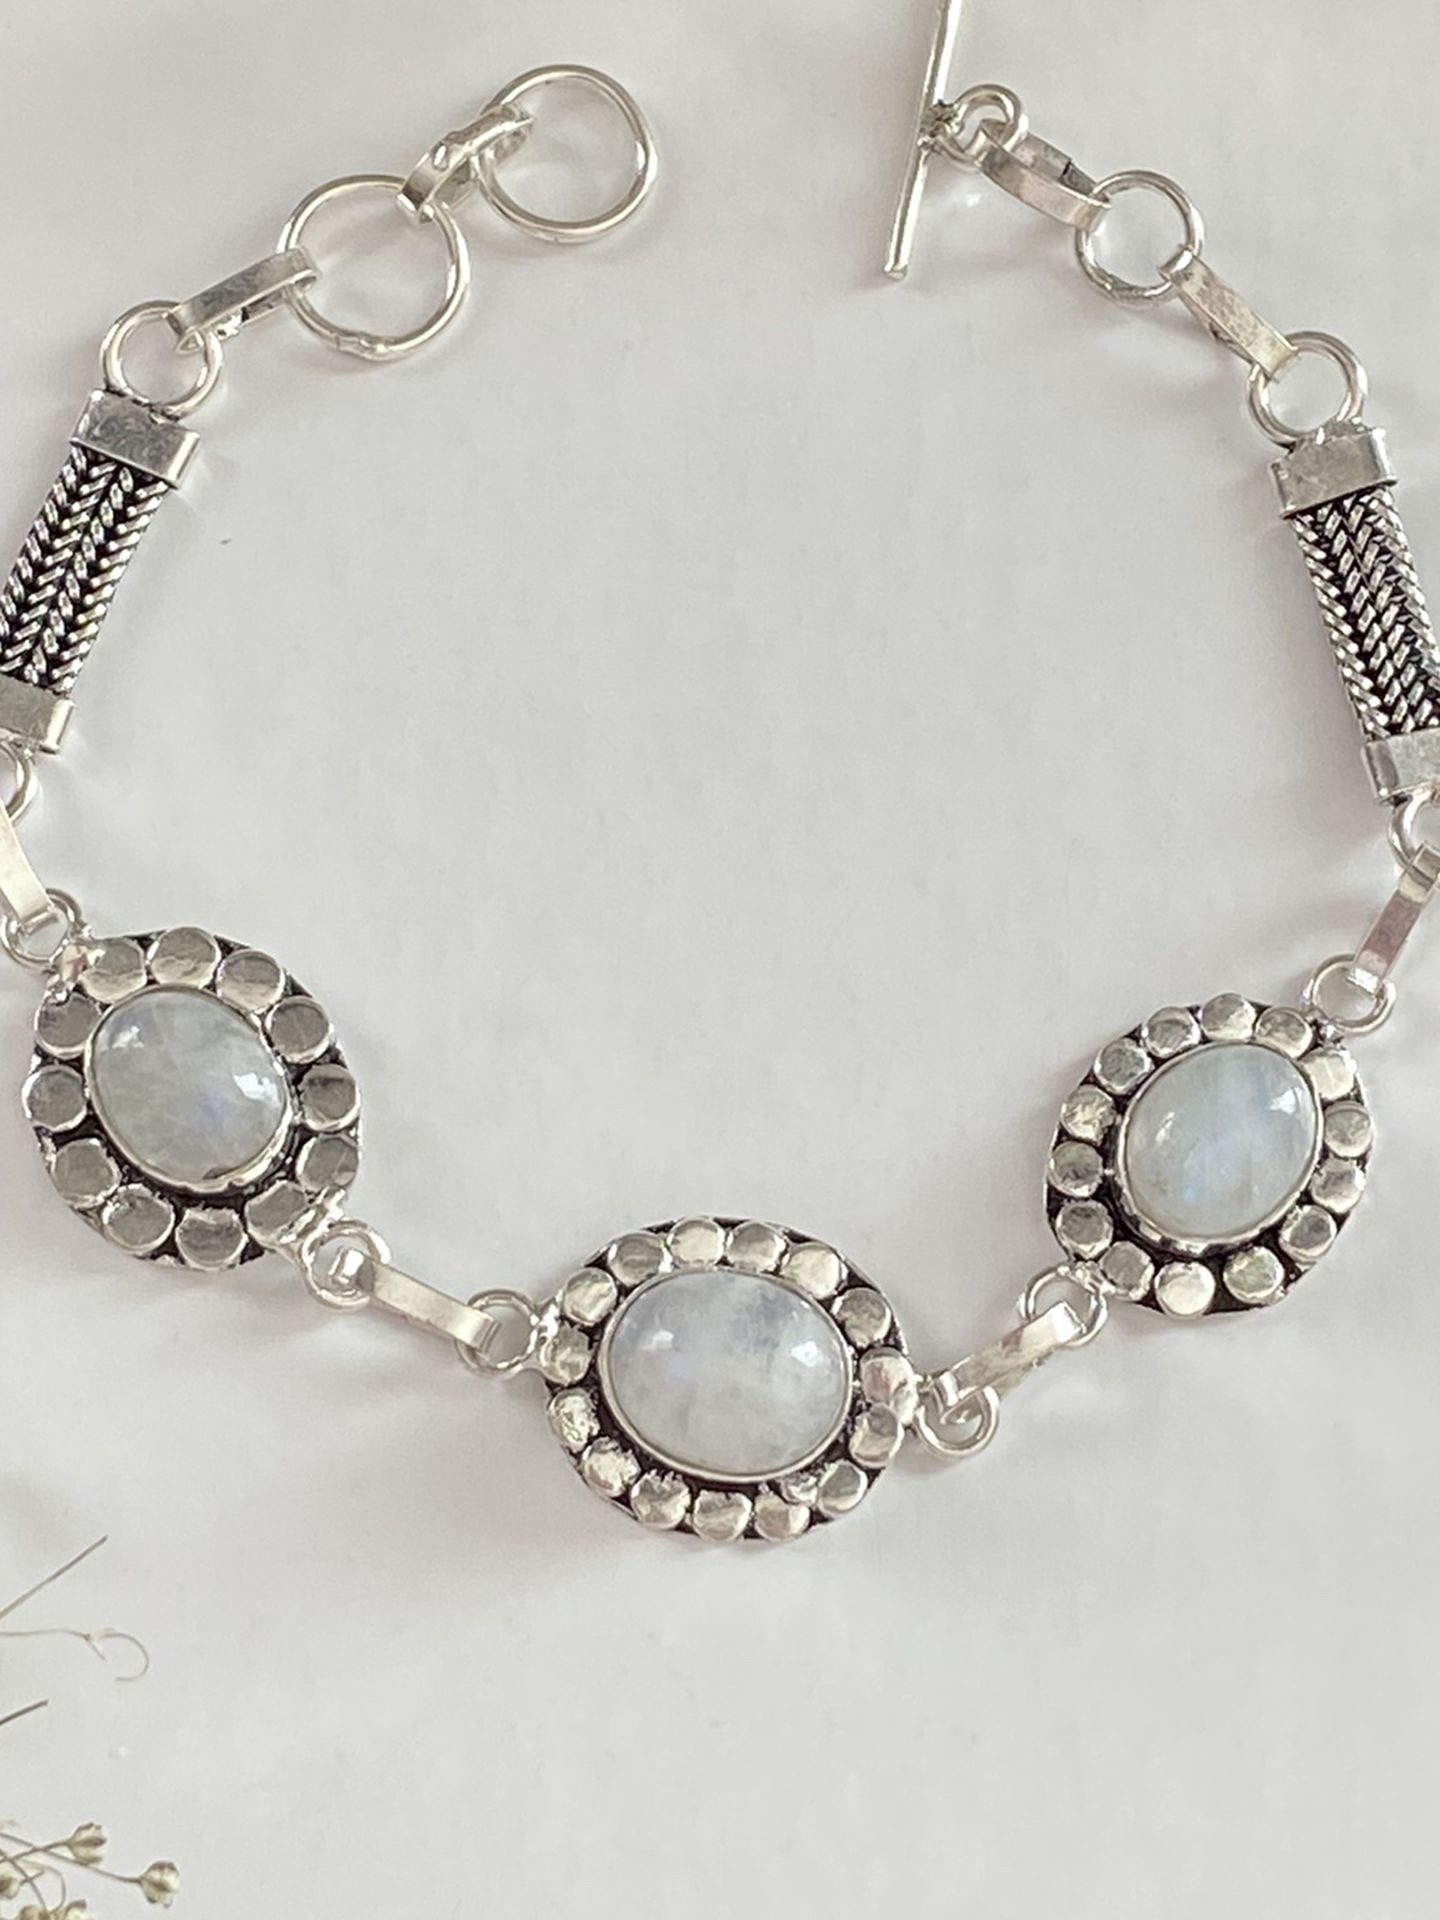 Handcrafted natural rainbow moonstone 925 sterling silver overlay bracelet